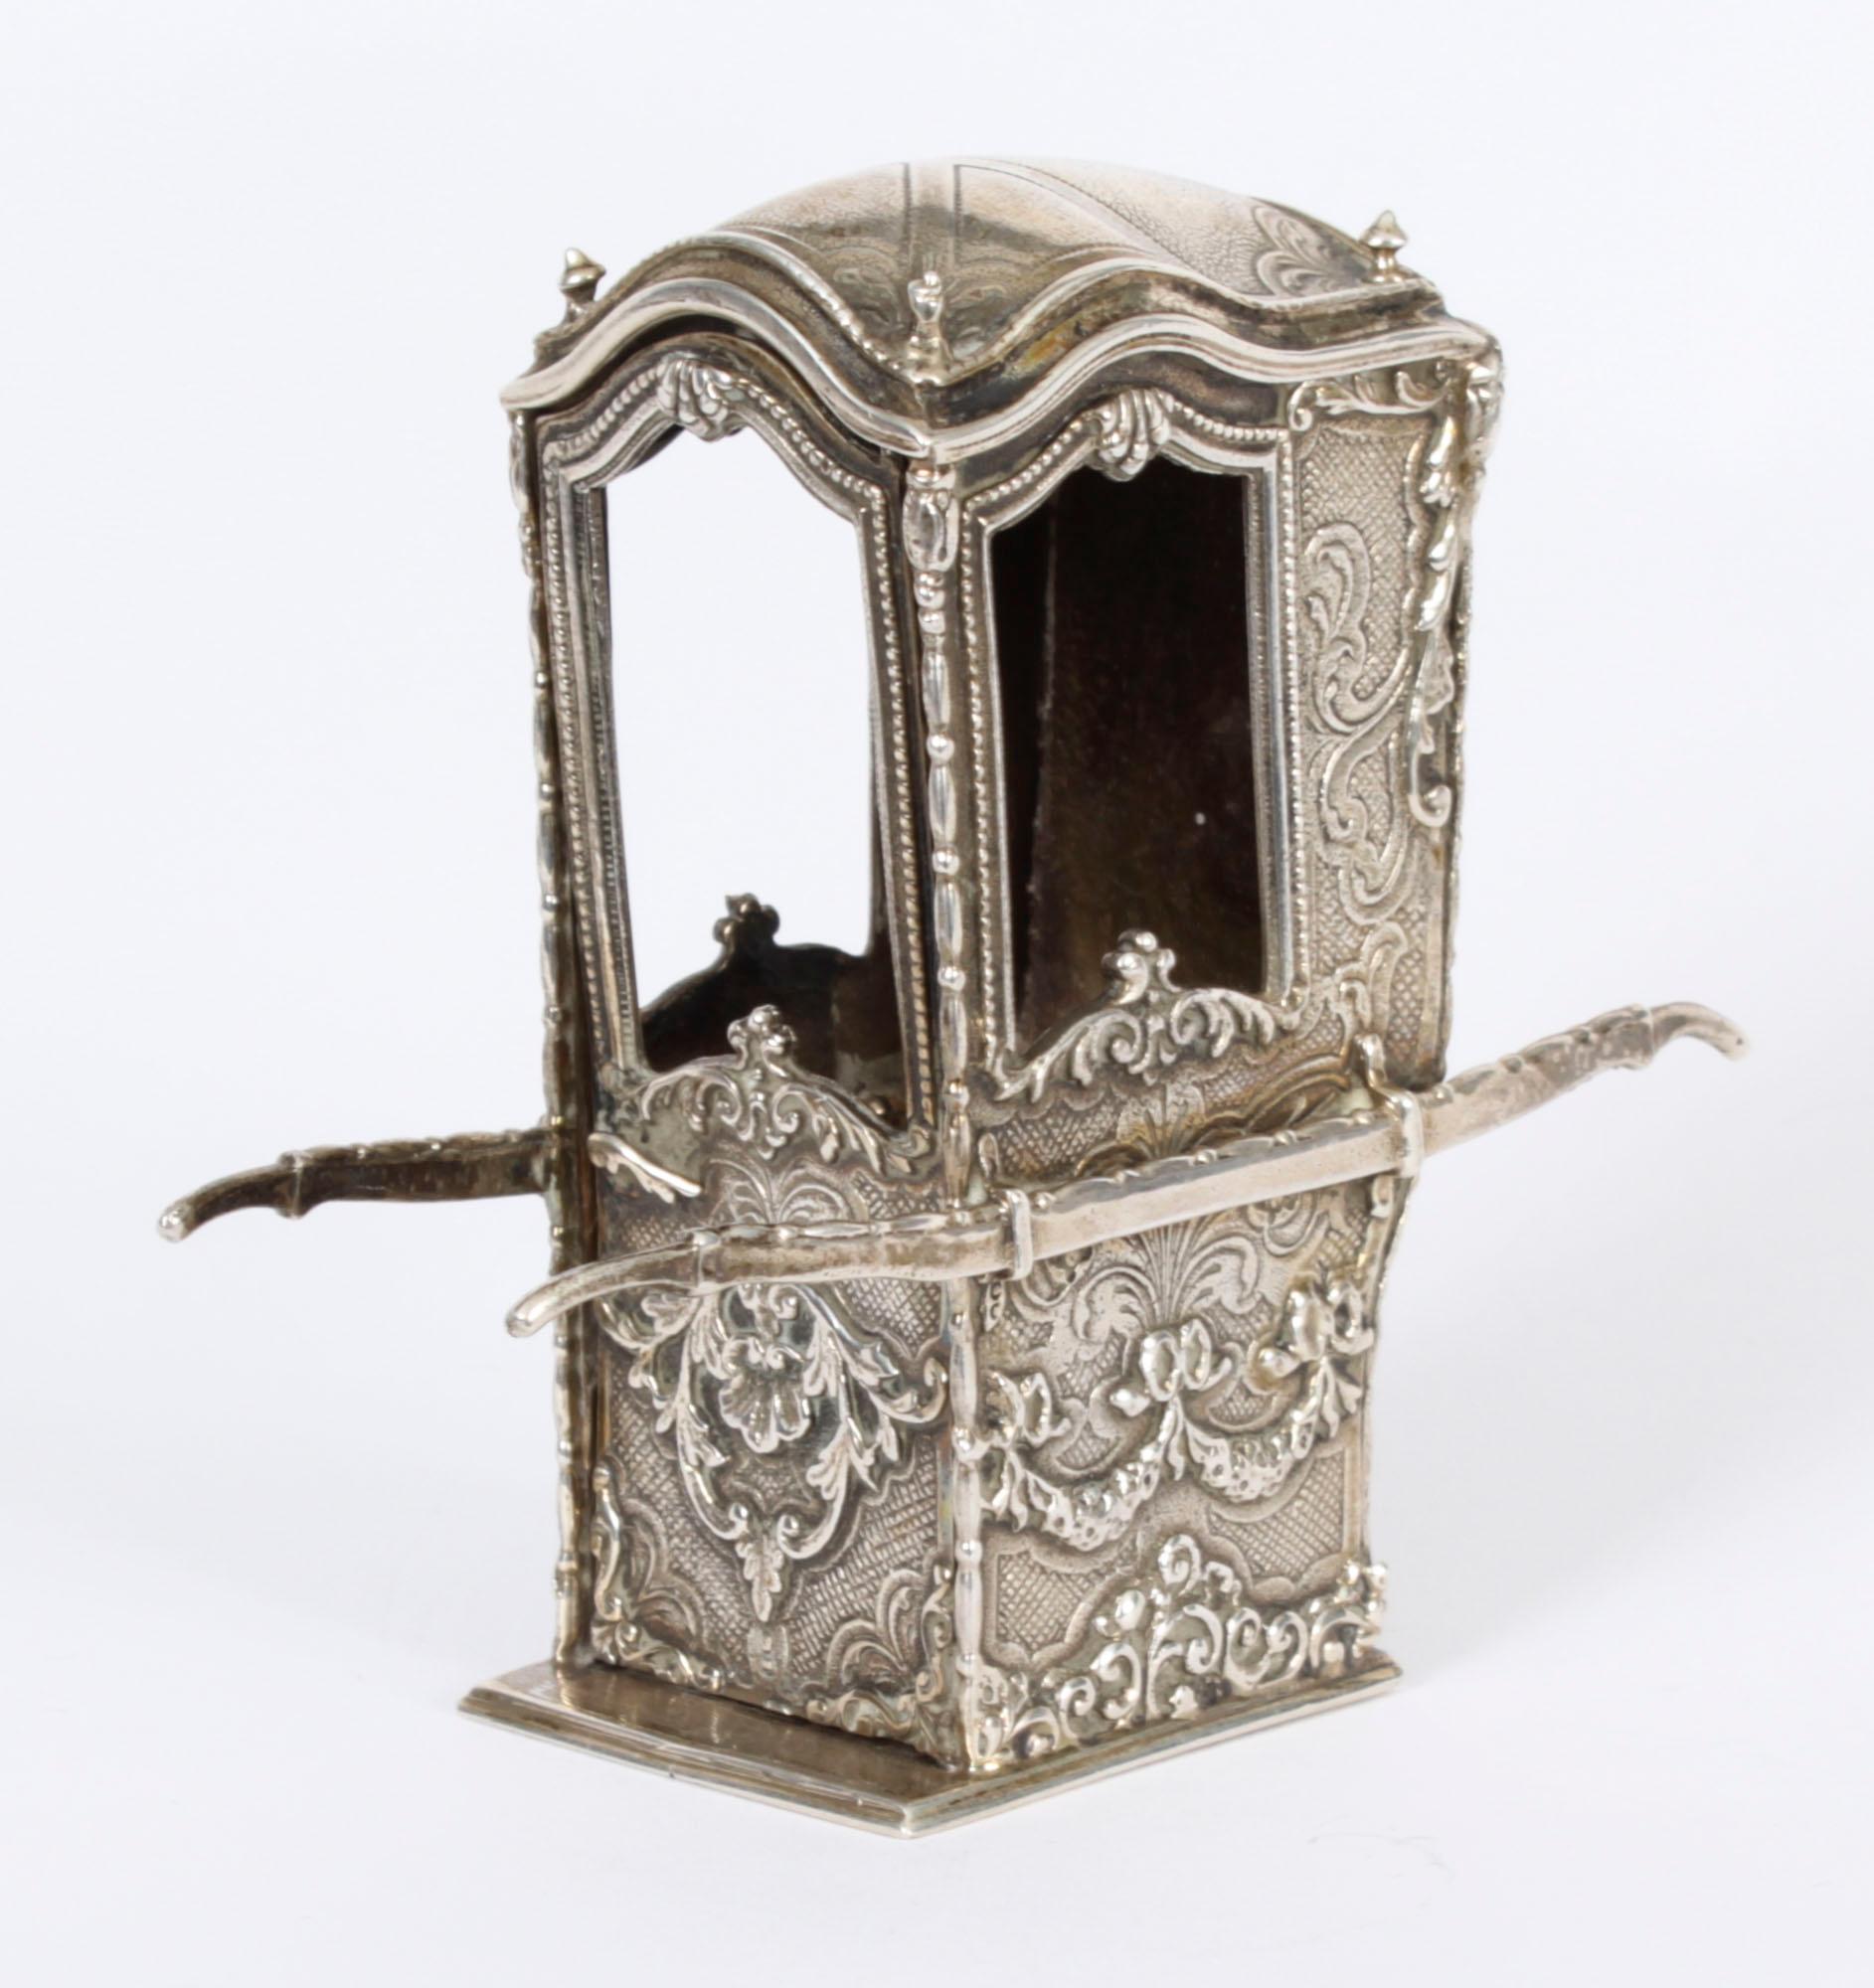 AntiqueFrench Silver Miniature Sedan Chair 19th Century For Sale 3